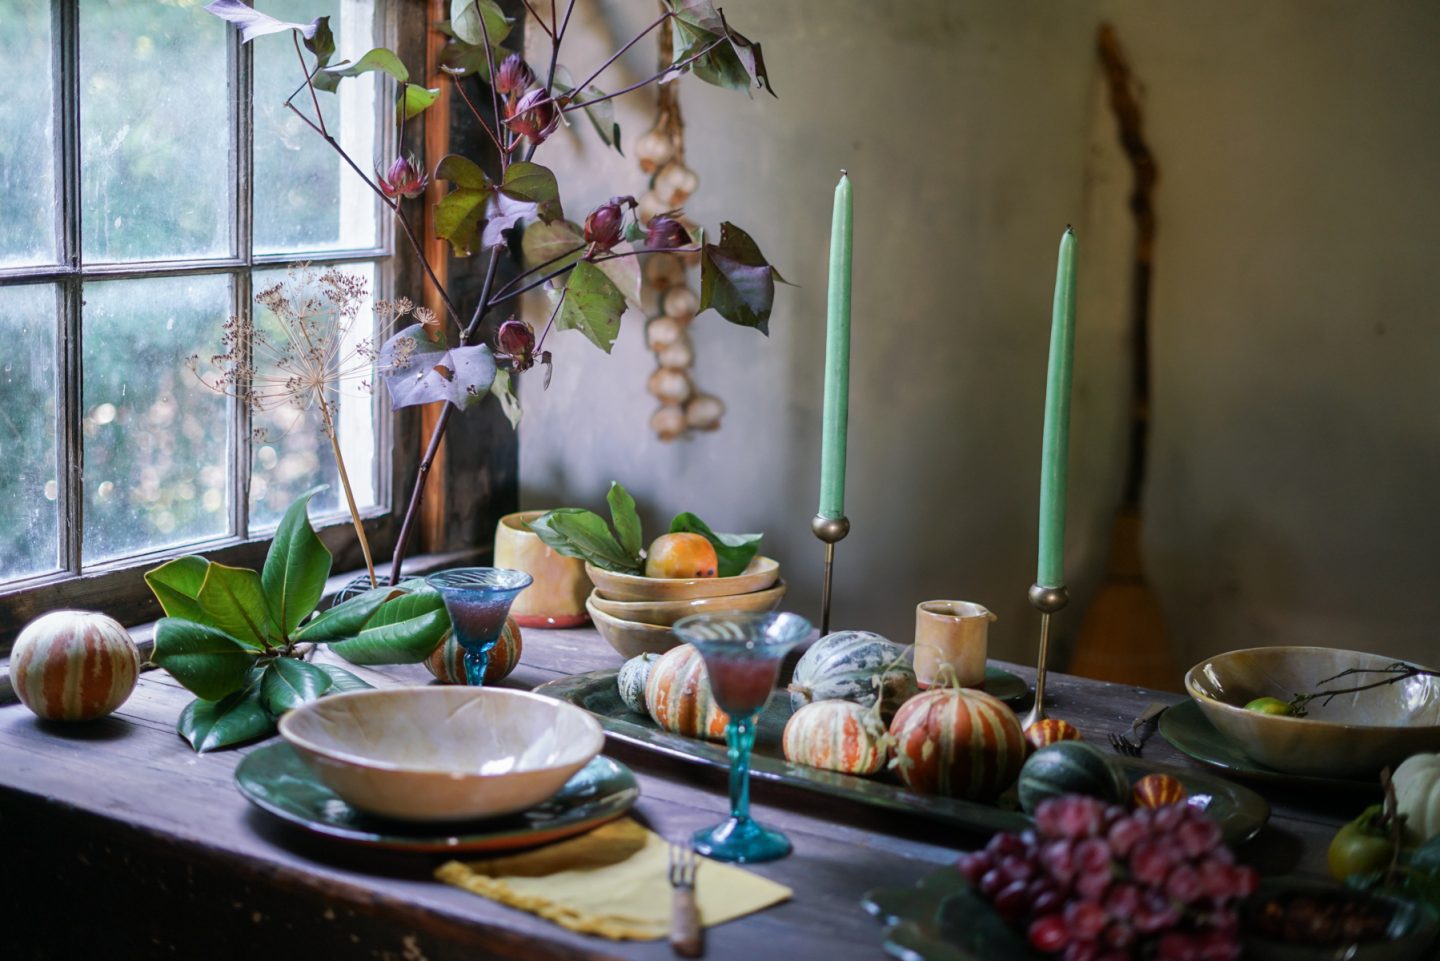 Tips for Choosing Dishware for the Holidays